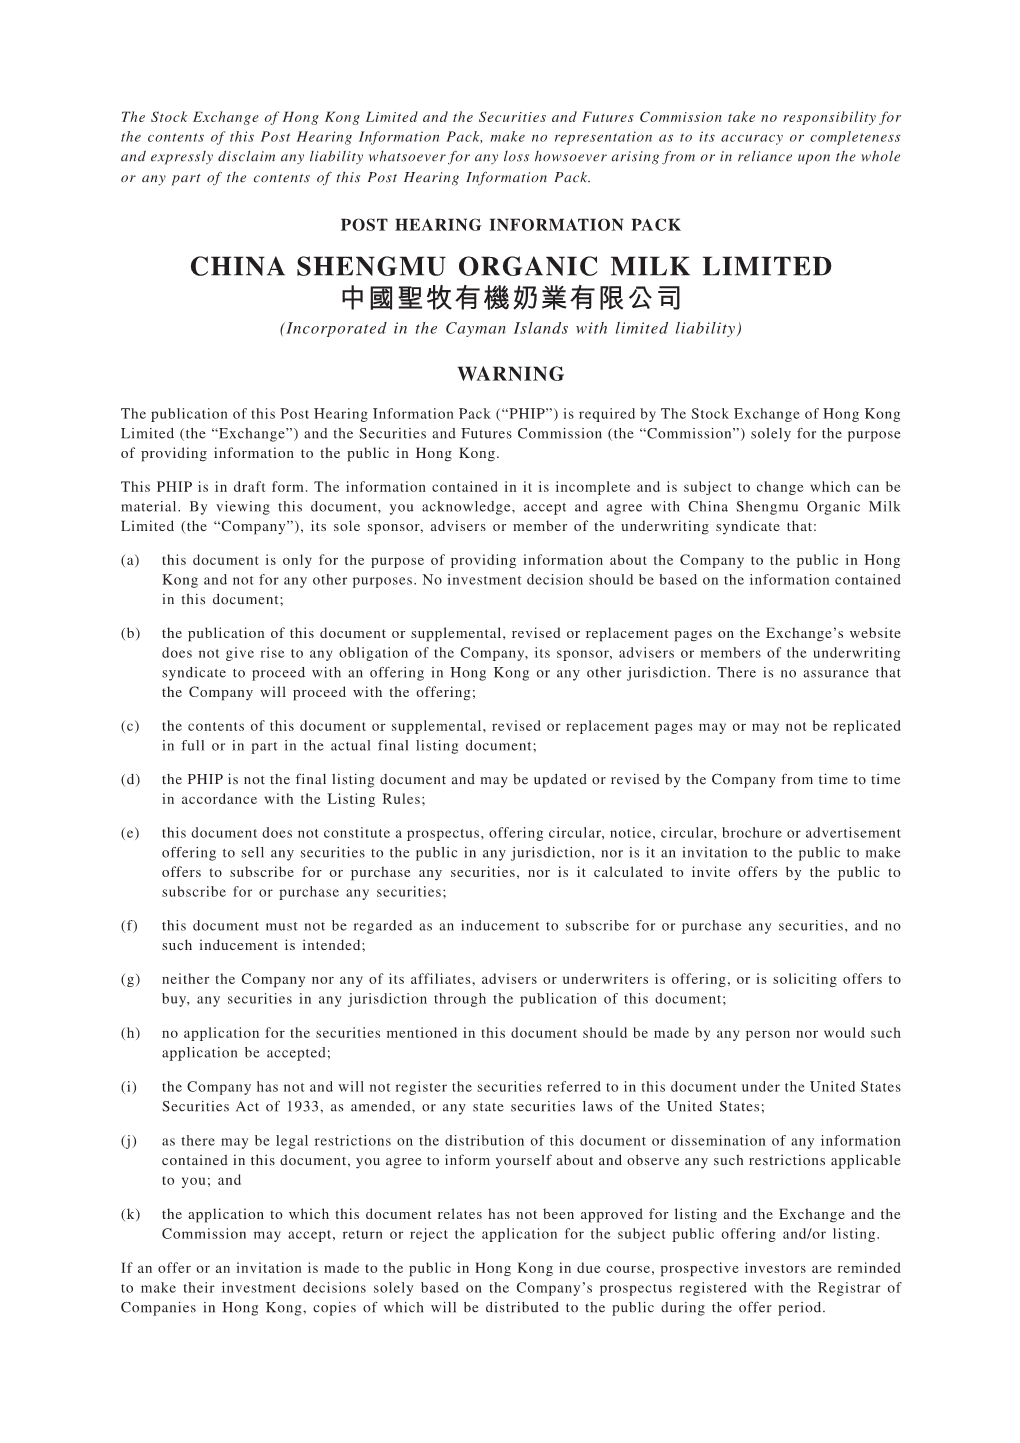 CHINA SHENGMU ORGANIC MILK LIMITED 中國聖牧有機奶業有限公司 (Incorporated in the Cayman Islands with Limited Liability)